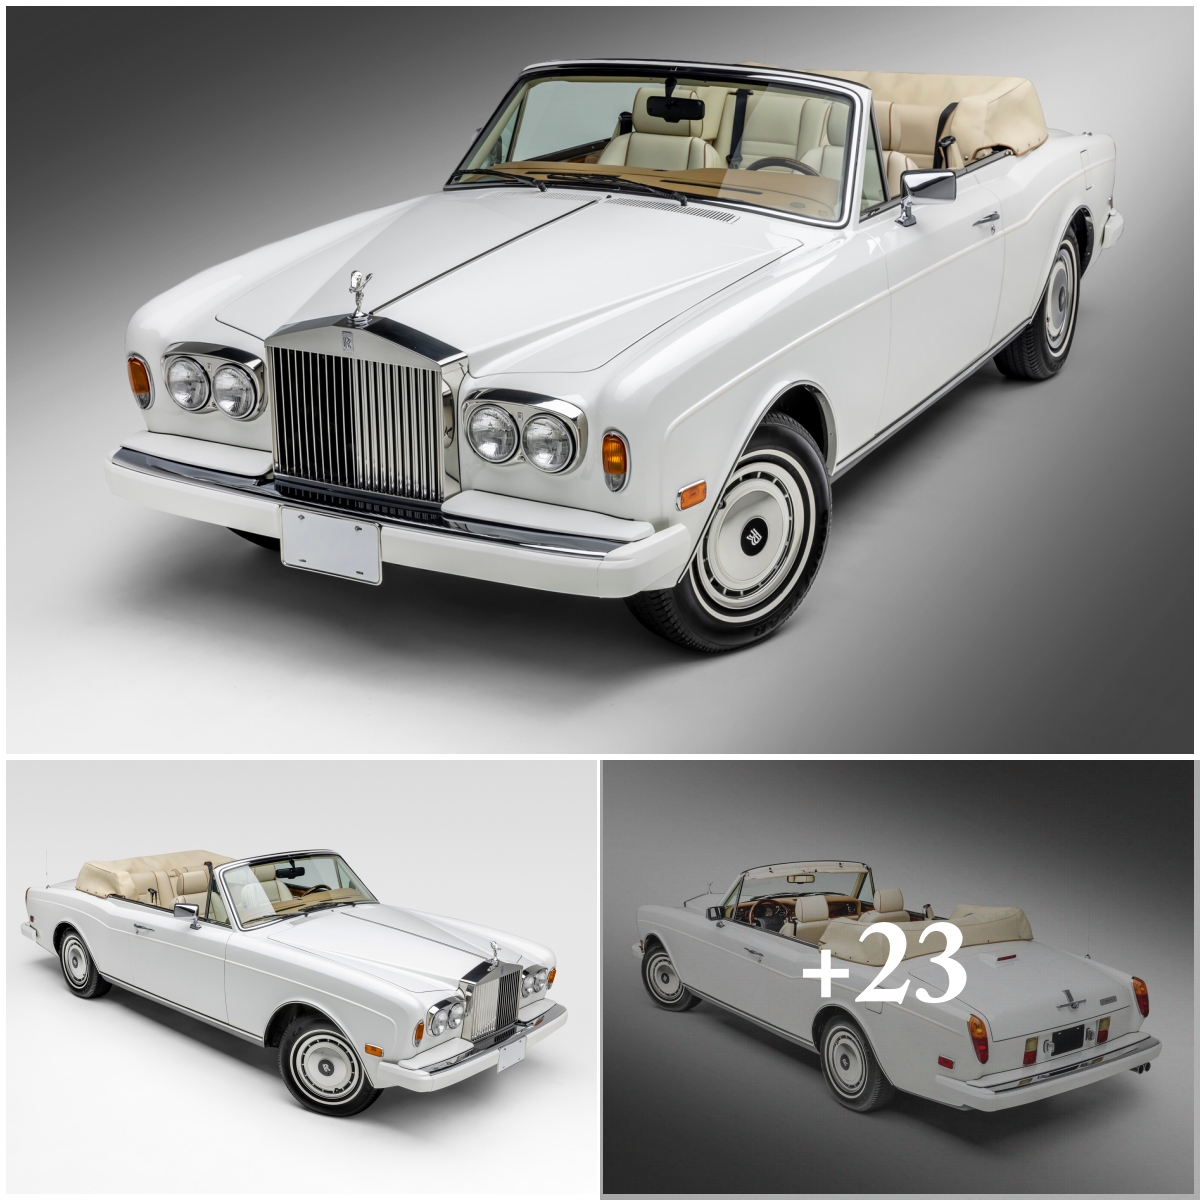 The Timeless Elegance of the 1994 Rolls-Royce Corniche IV